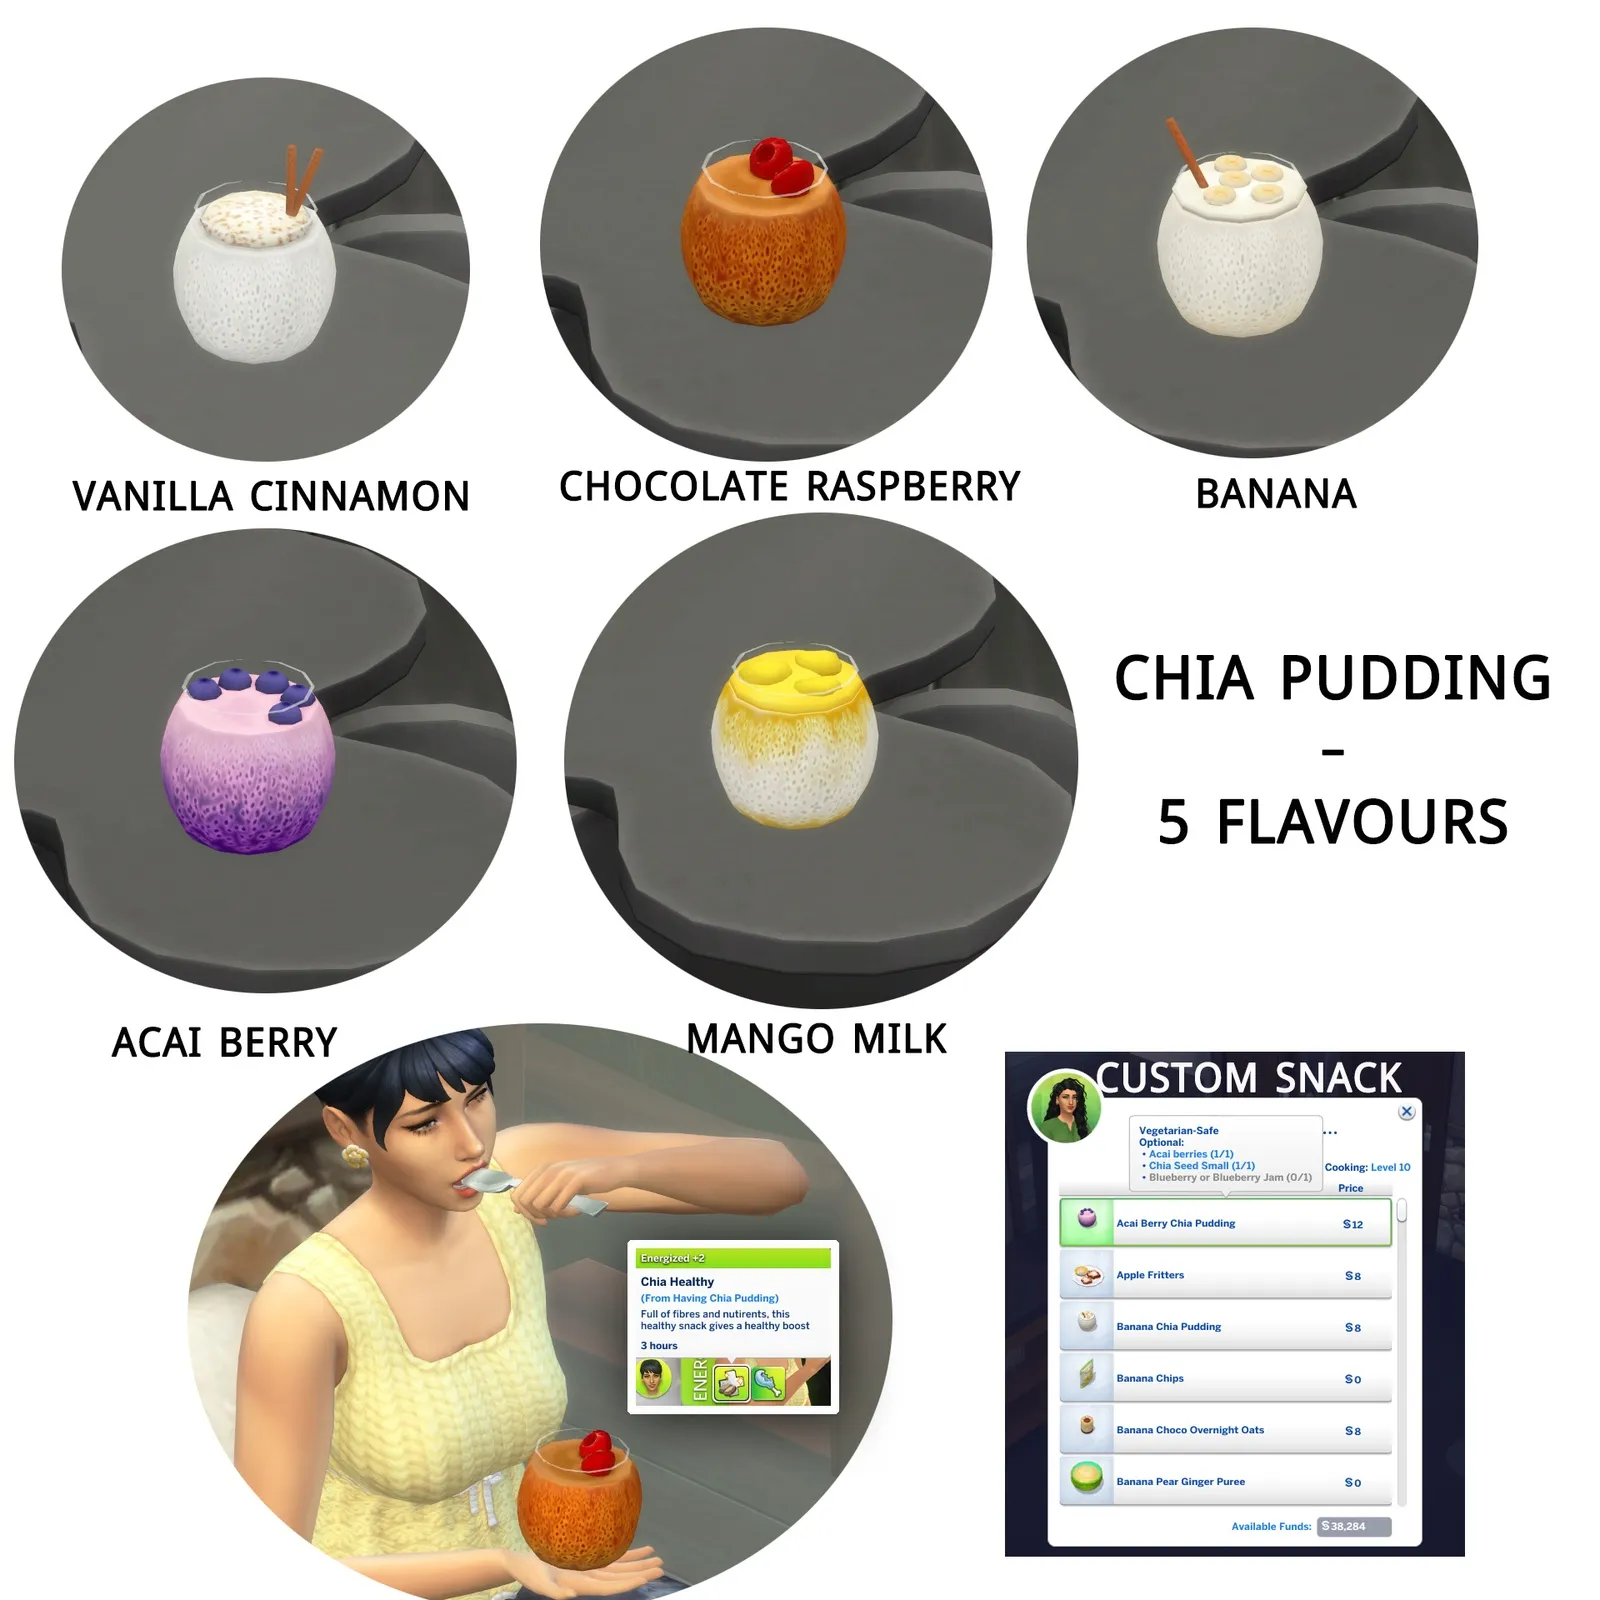 CHIA PUDDING - 5 FLAVOURS